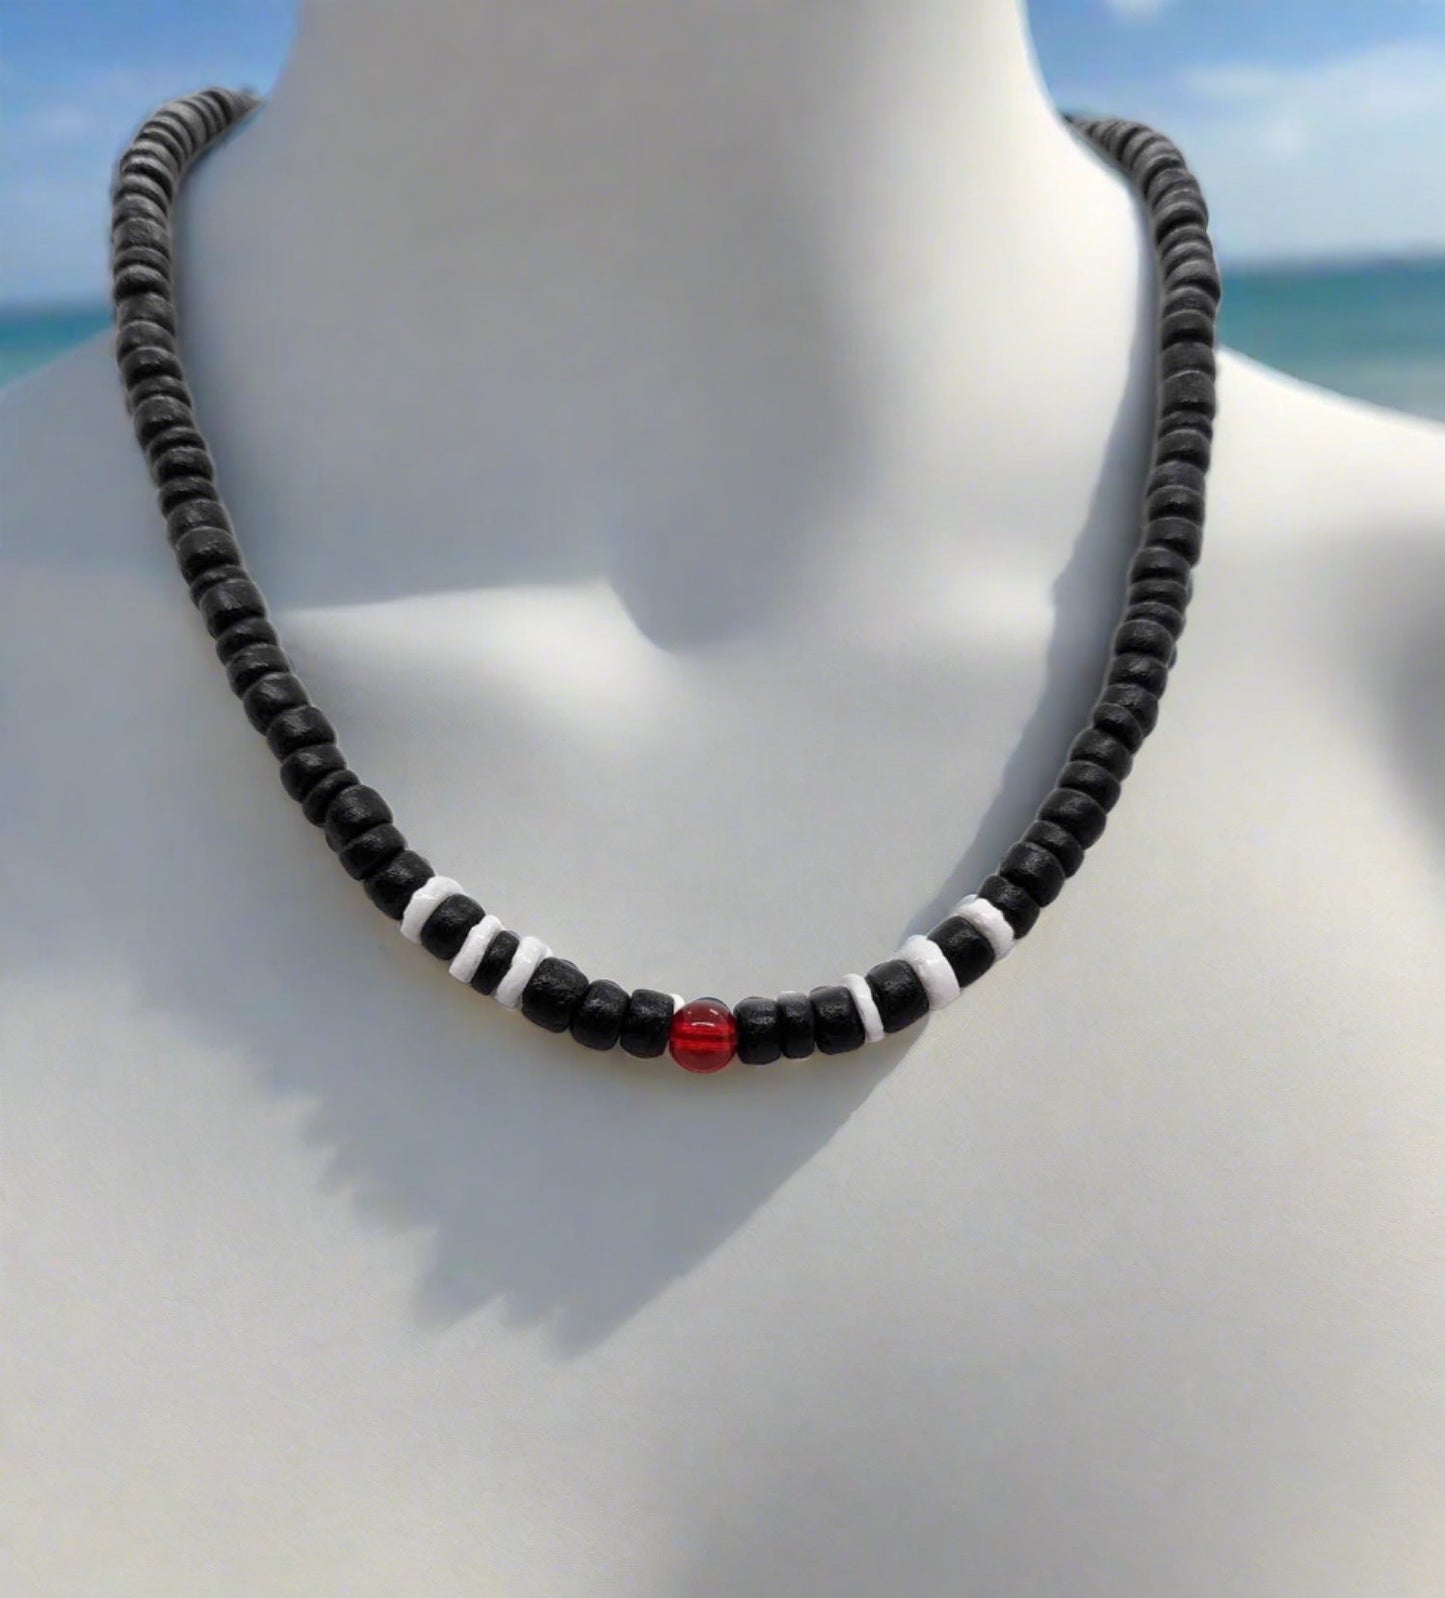 Black wooden beaded necklace, with white wooden beads and a red accent beads.